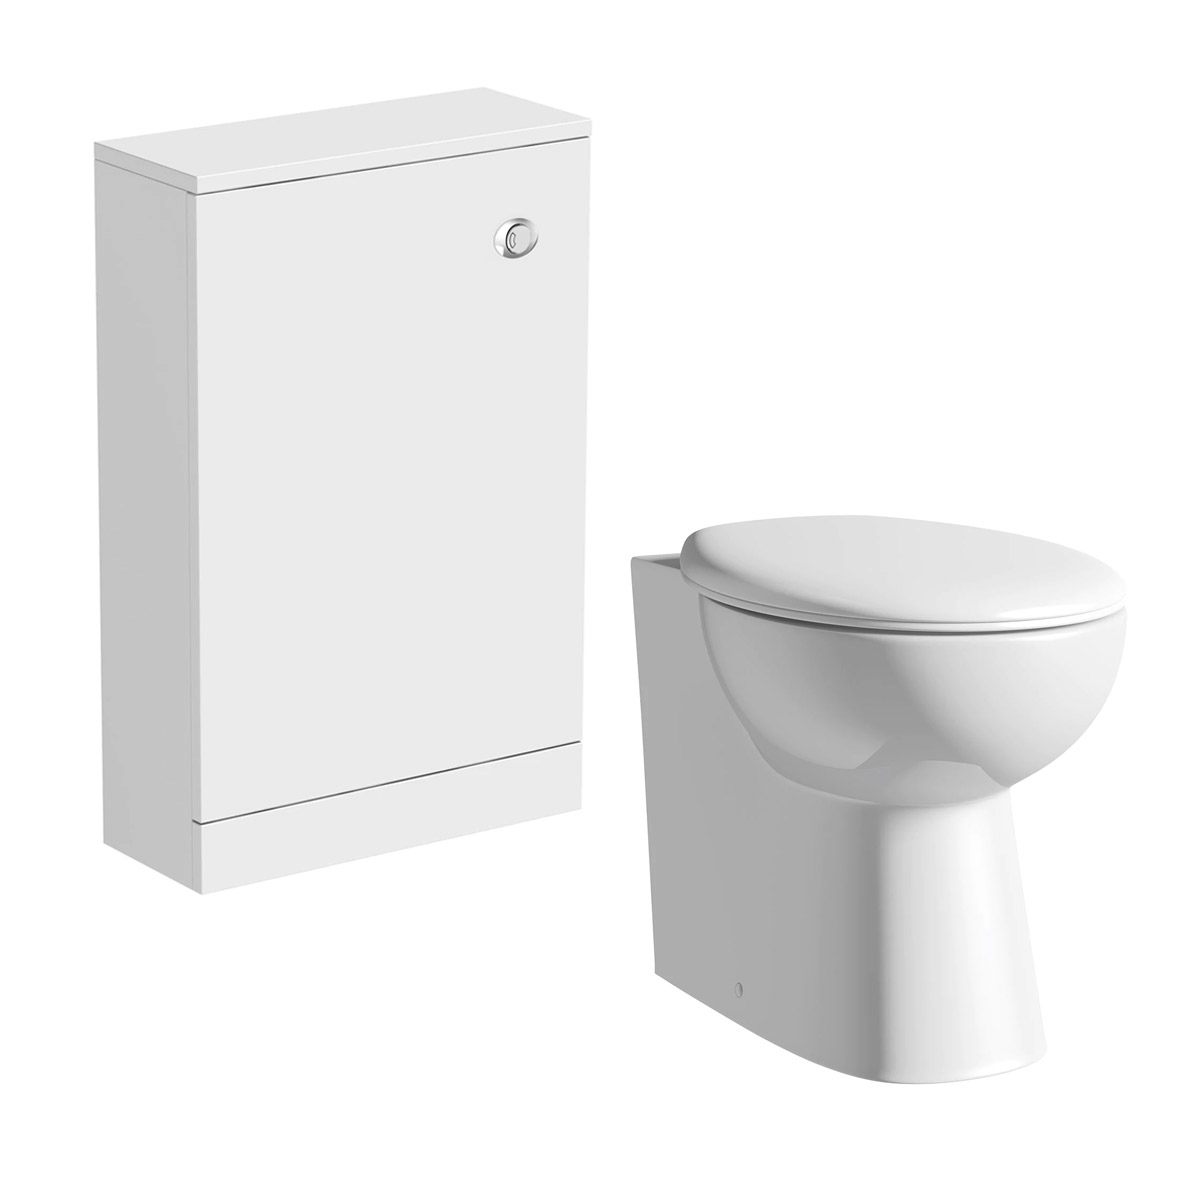 Clarity white back to wall toilet unit and toilet with seat